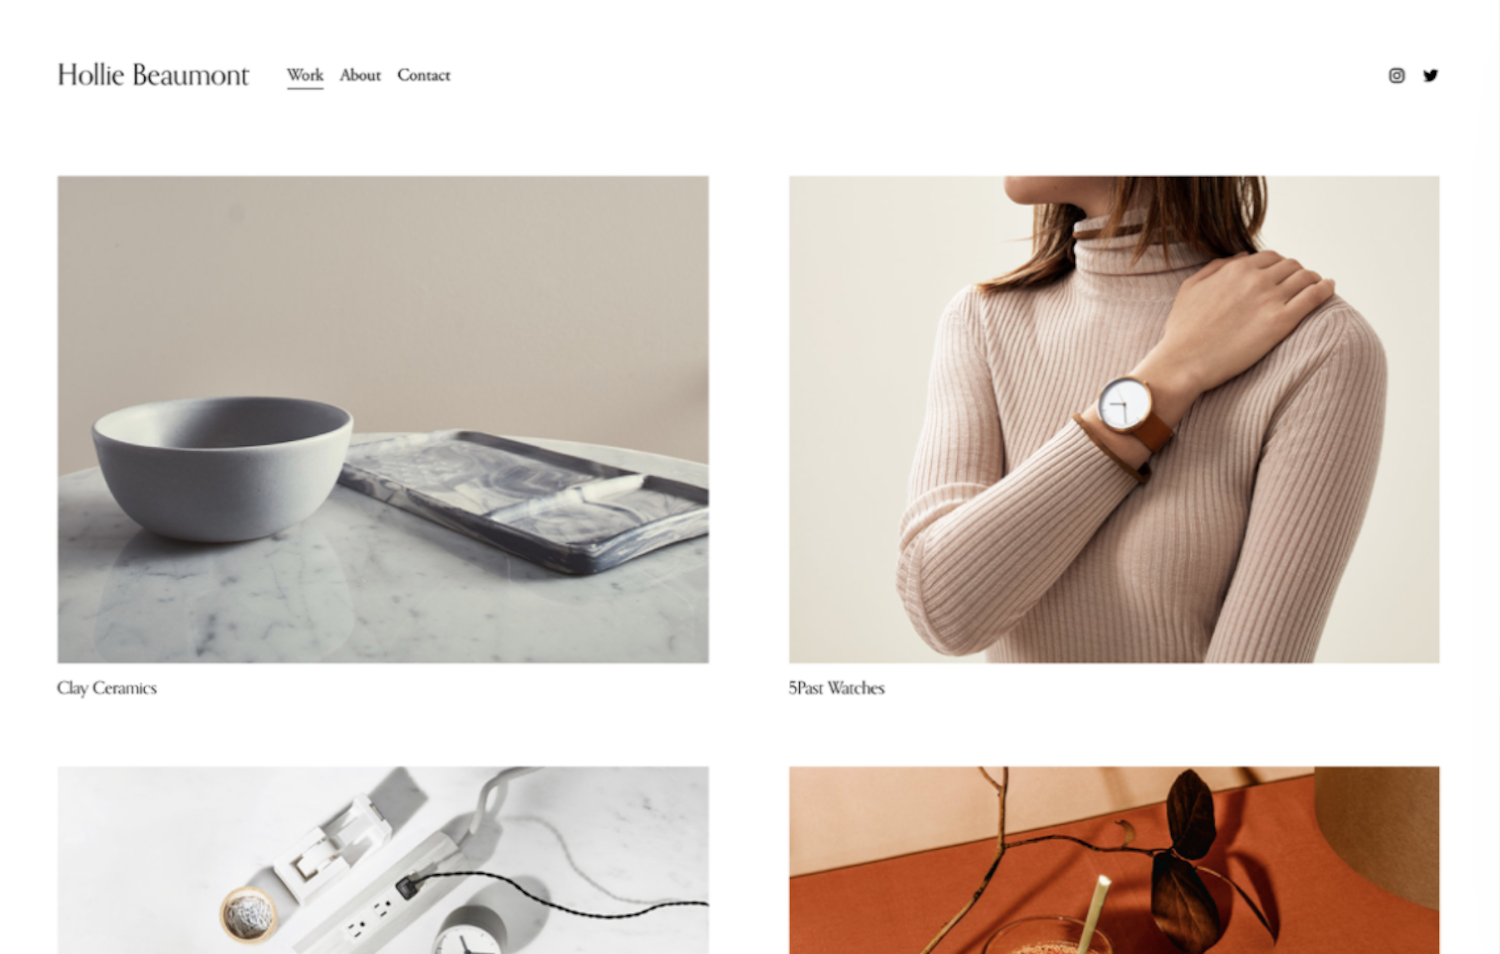 Clean, calming designs are a reaction to anxiety-inducing websites.